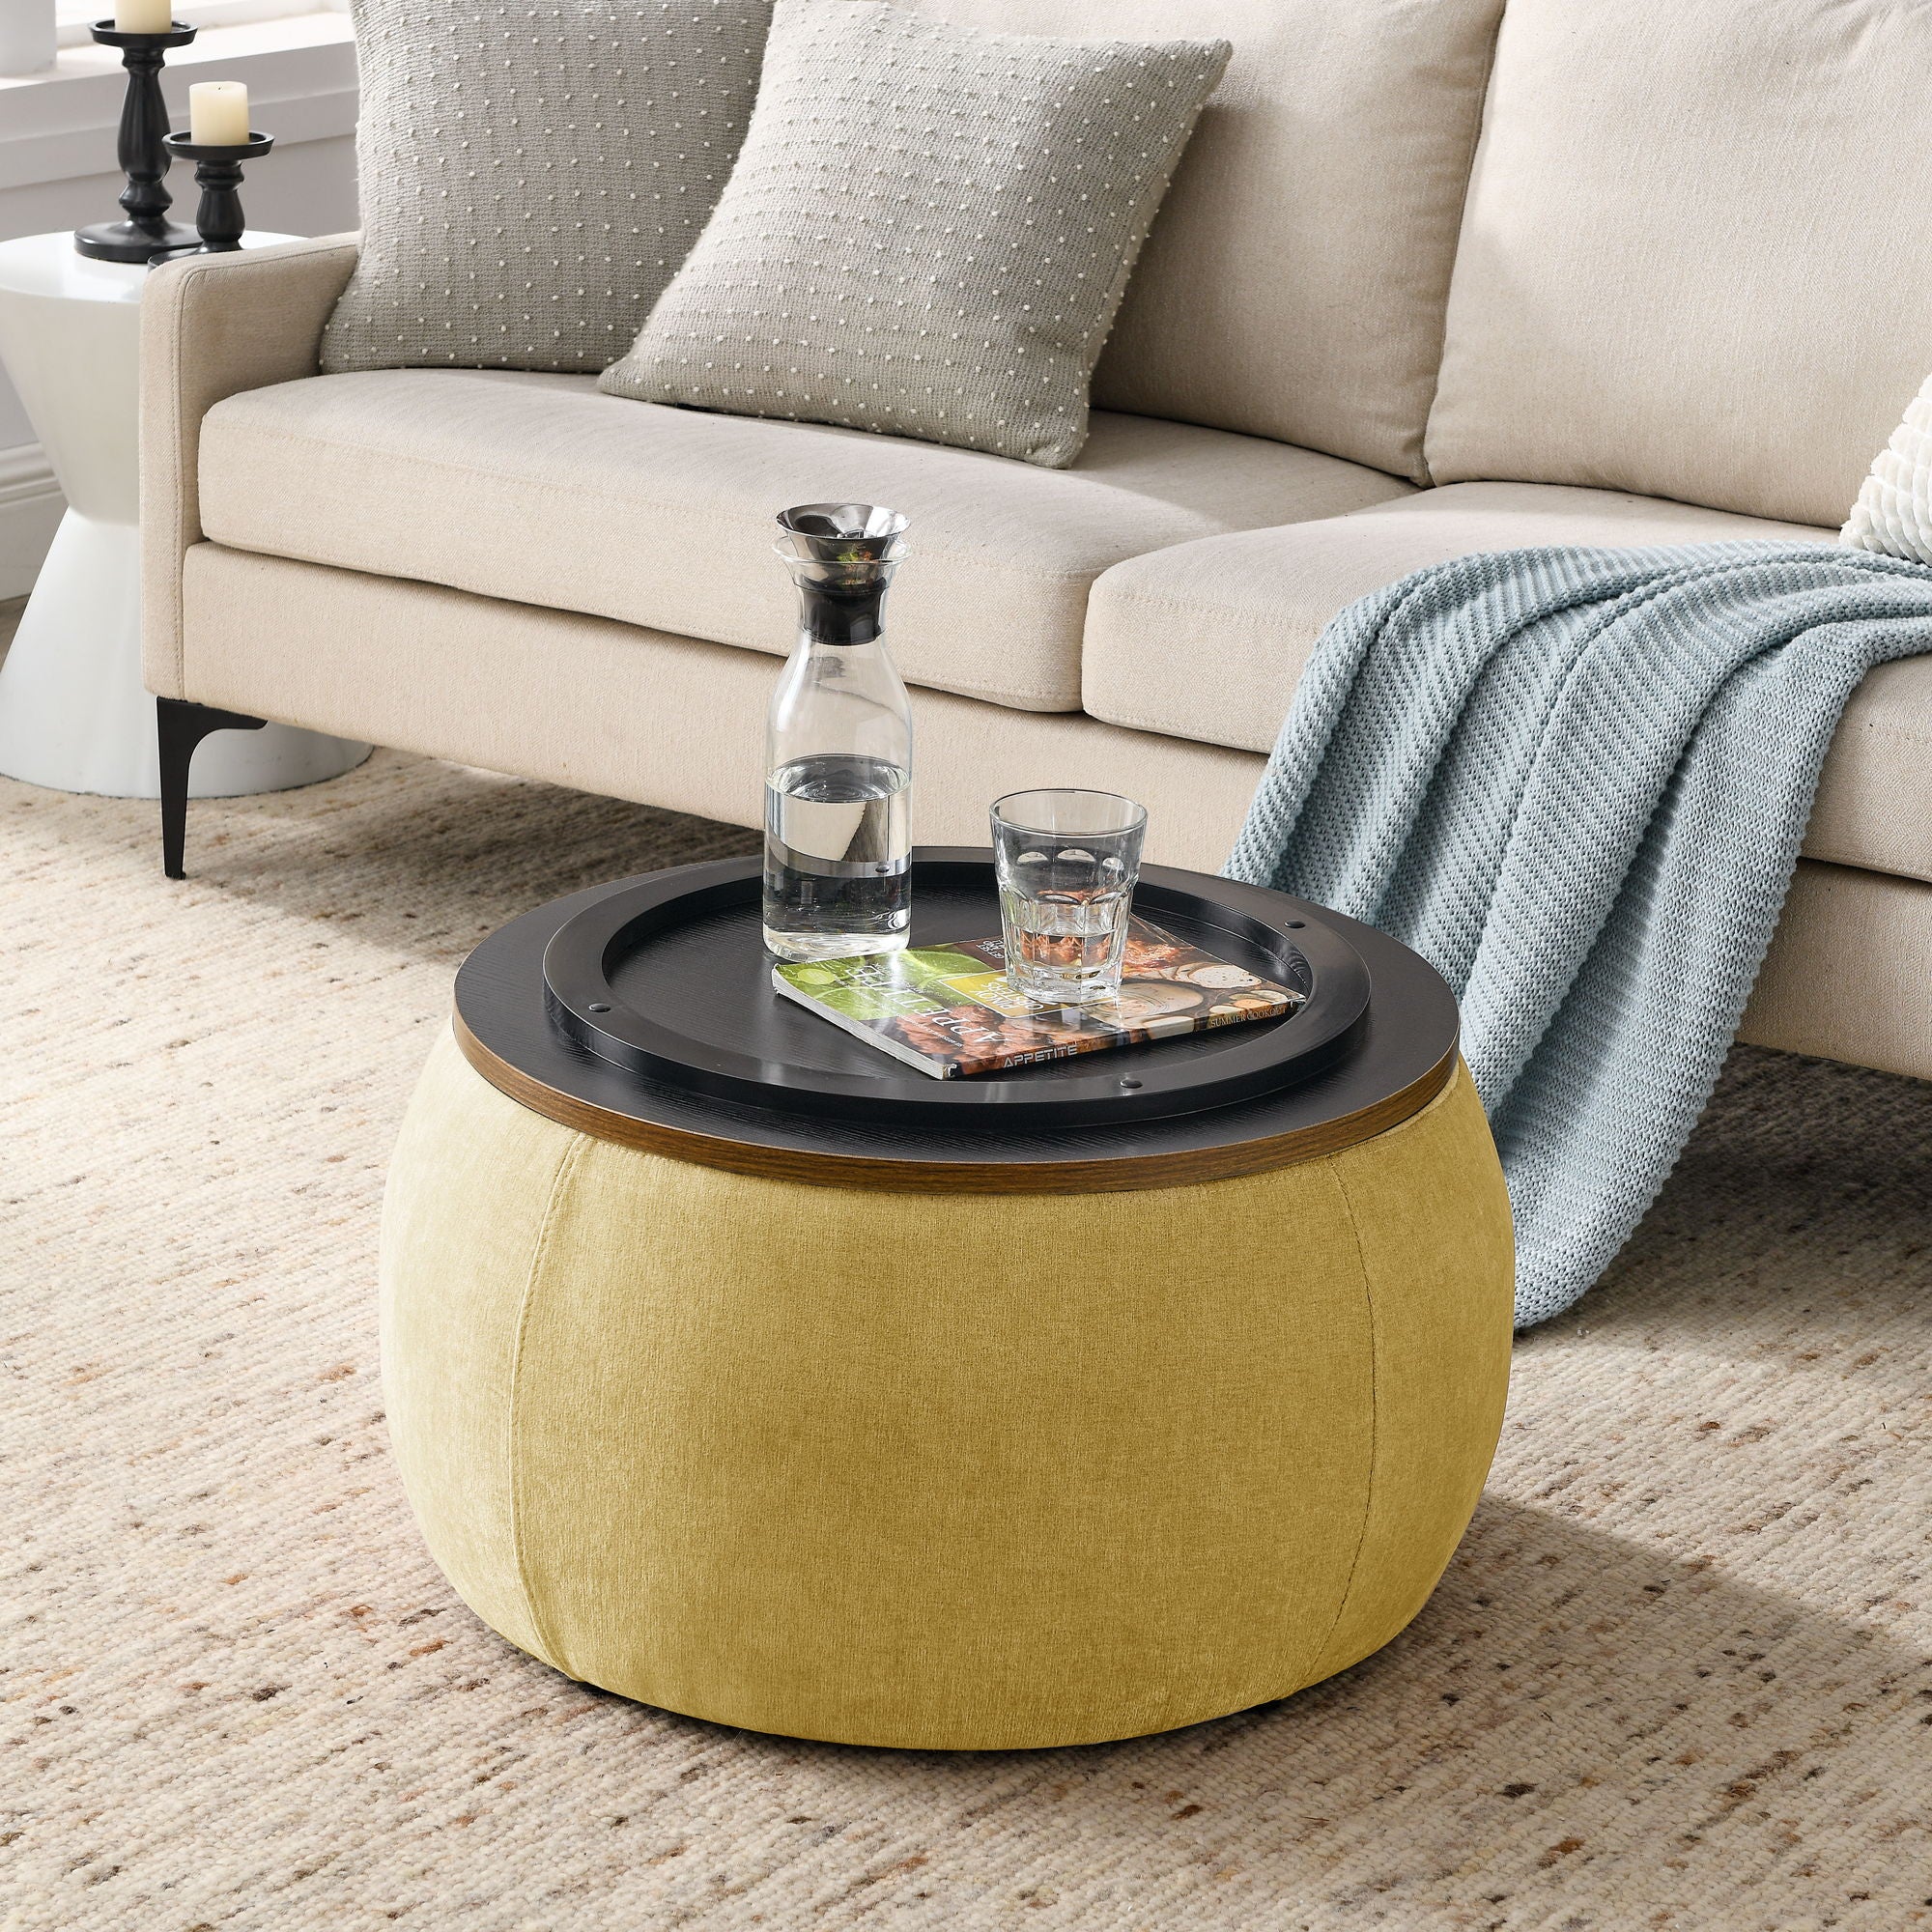 Round Storage Ottoman, 2 In 1 Function, Work As End Table And Ottoman, Yellow